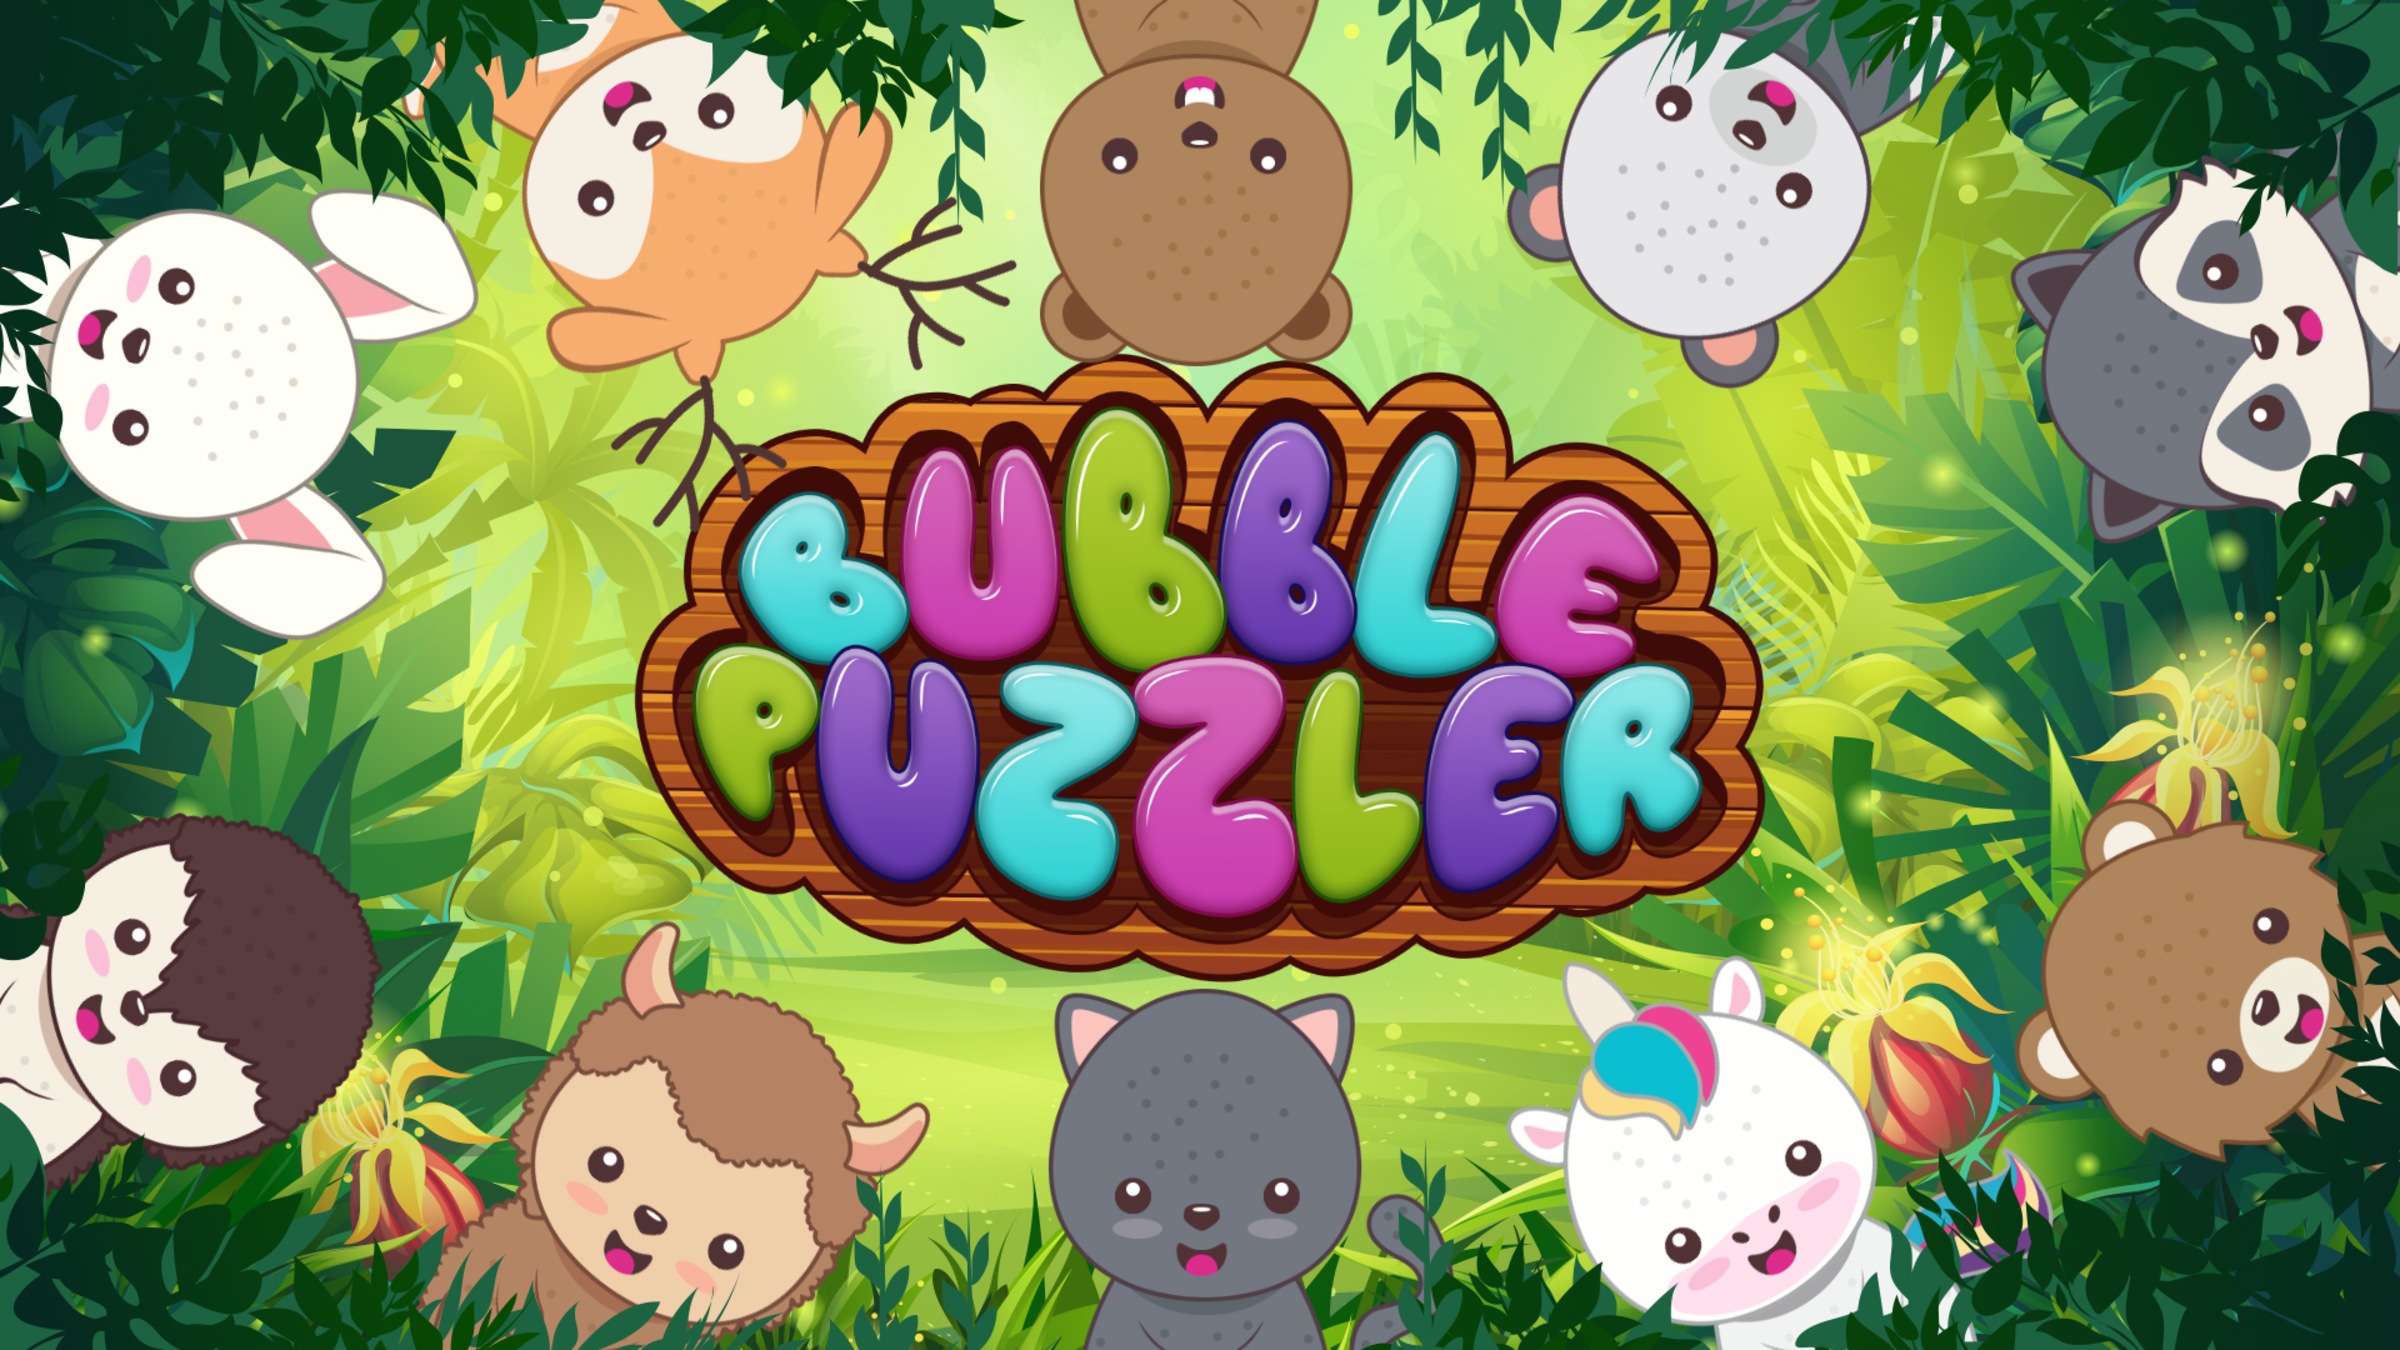 Bubble Puzzler for Nintendo Switch